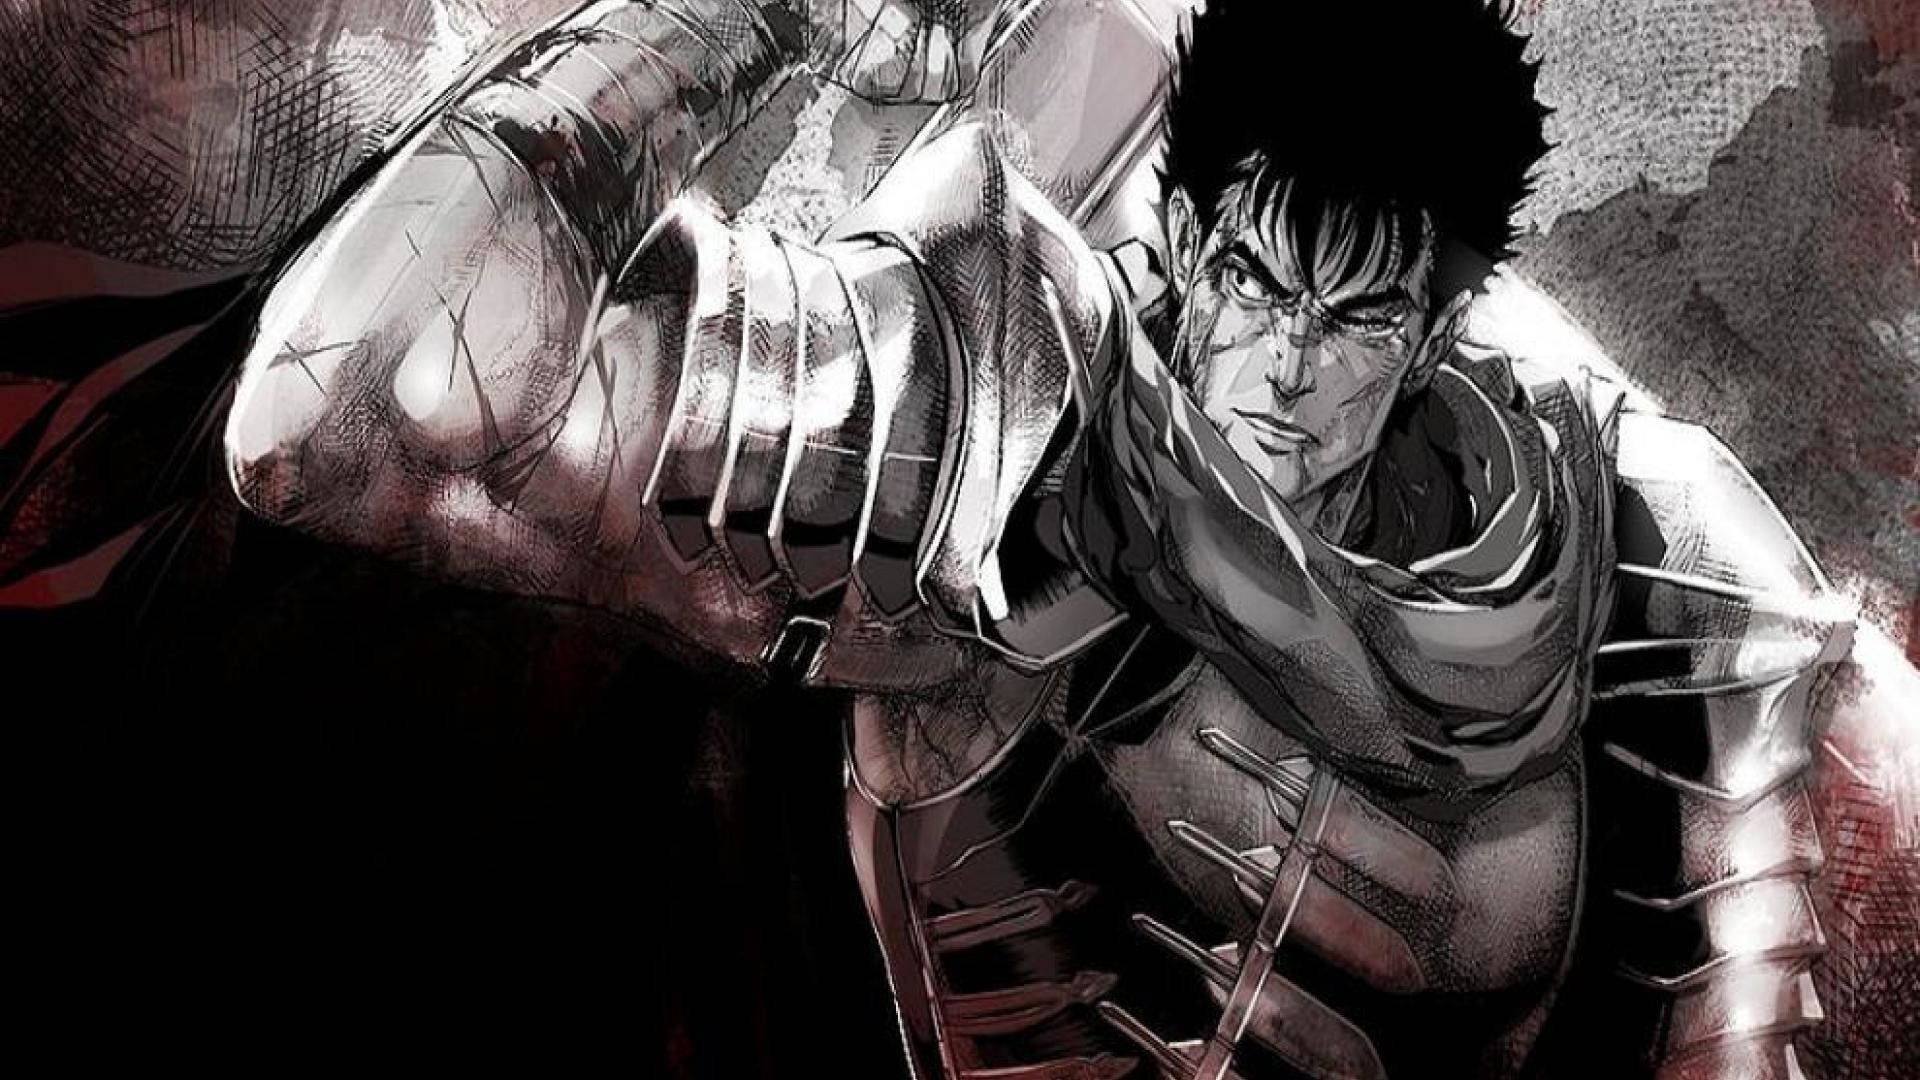 Guts, the one-man army, stares into the horizon determined in Berserk. Wallpaper